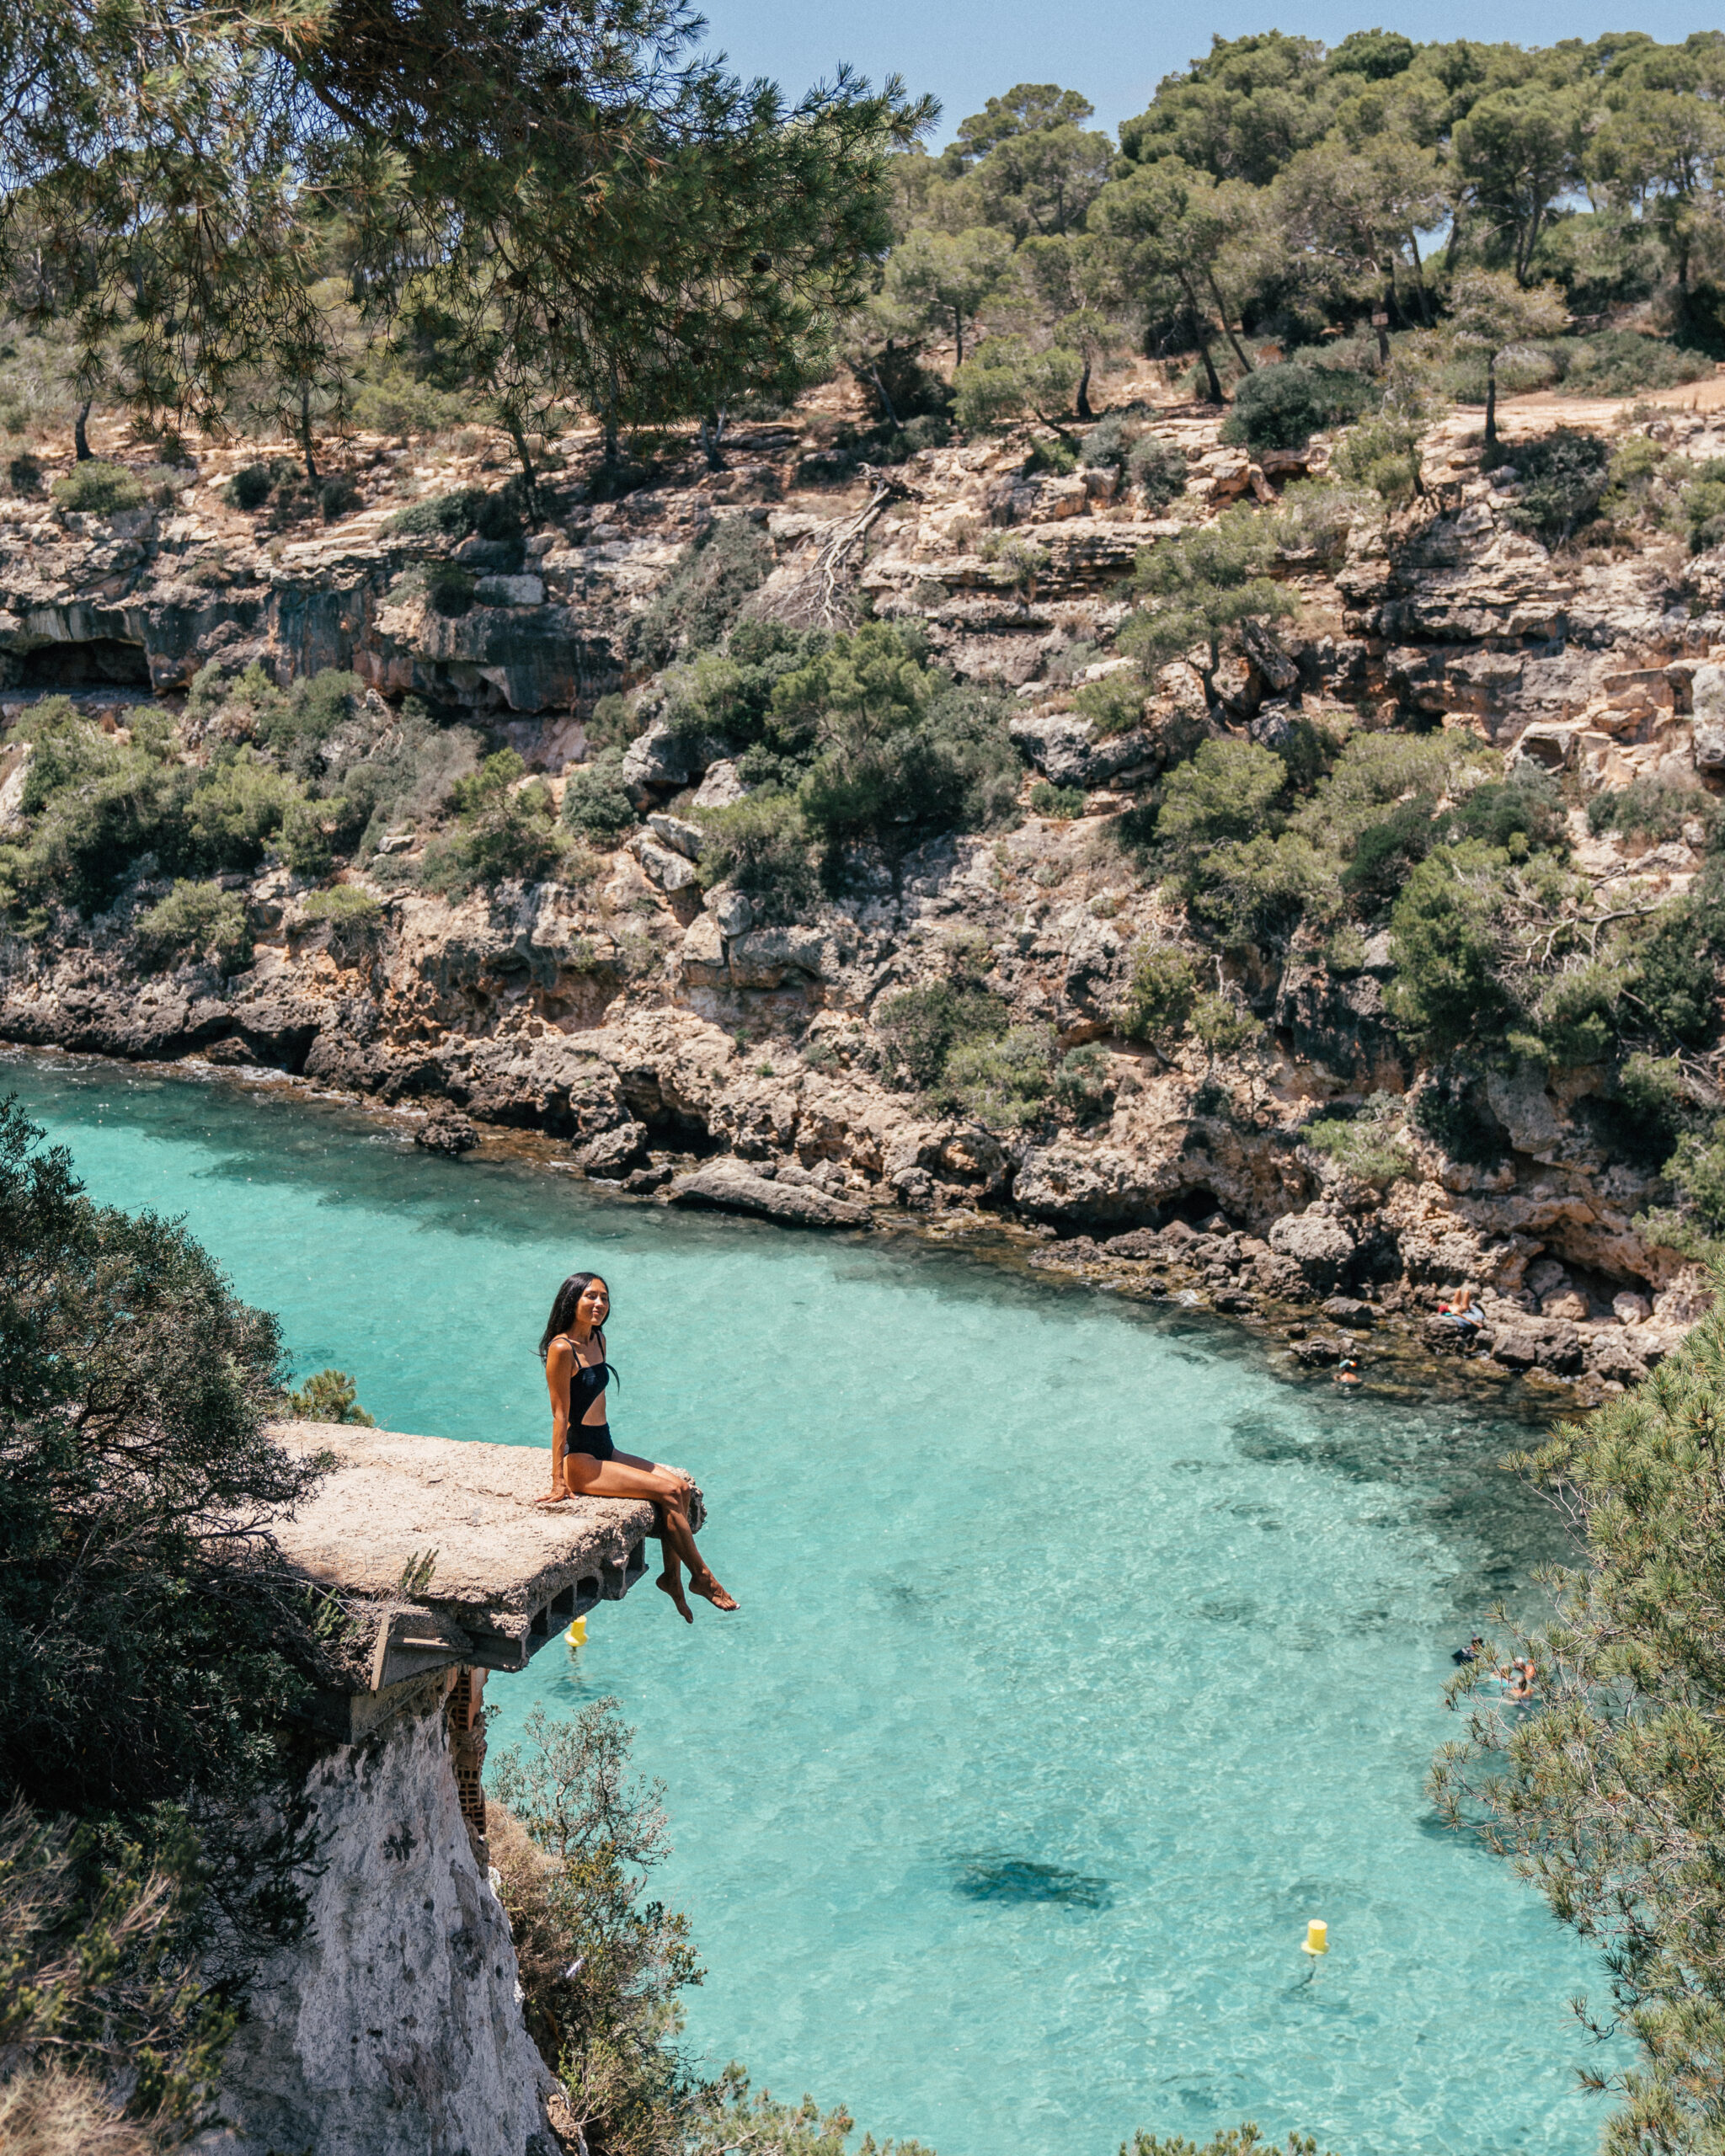 The ultimate guide to the island of Mallorca, in Spain including the best beaches, viewpoints, photo locations, hotels, restaurants and more.